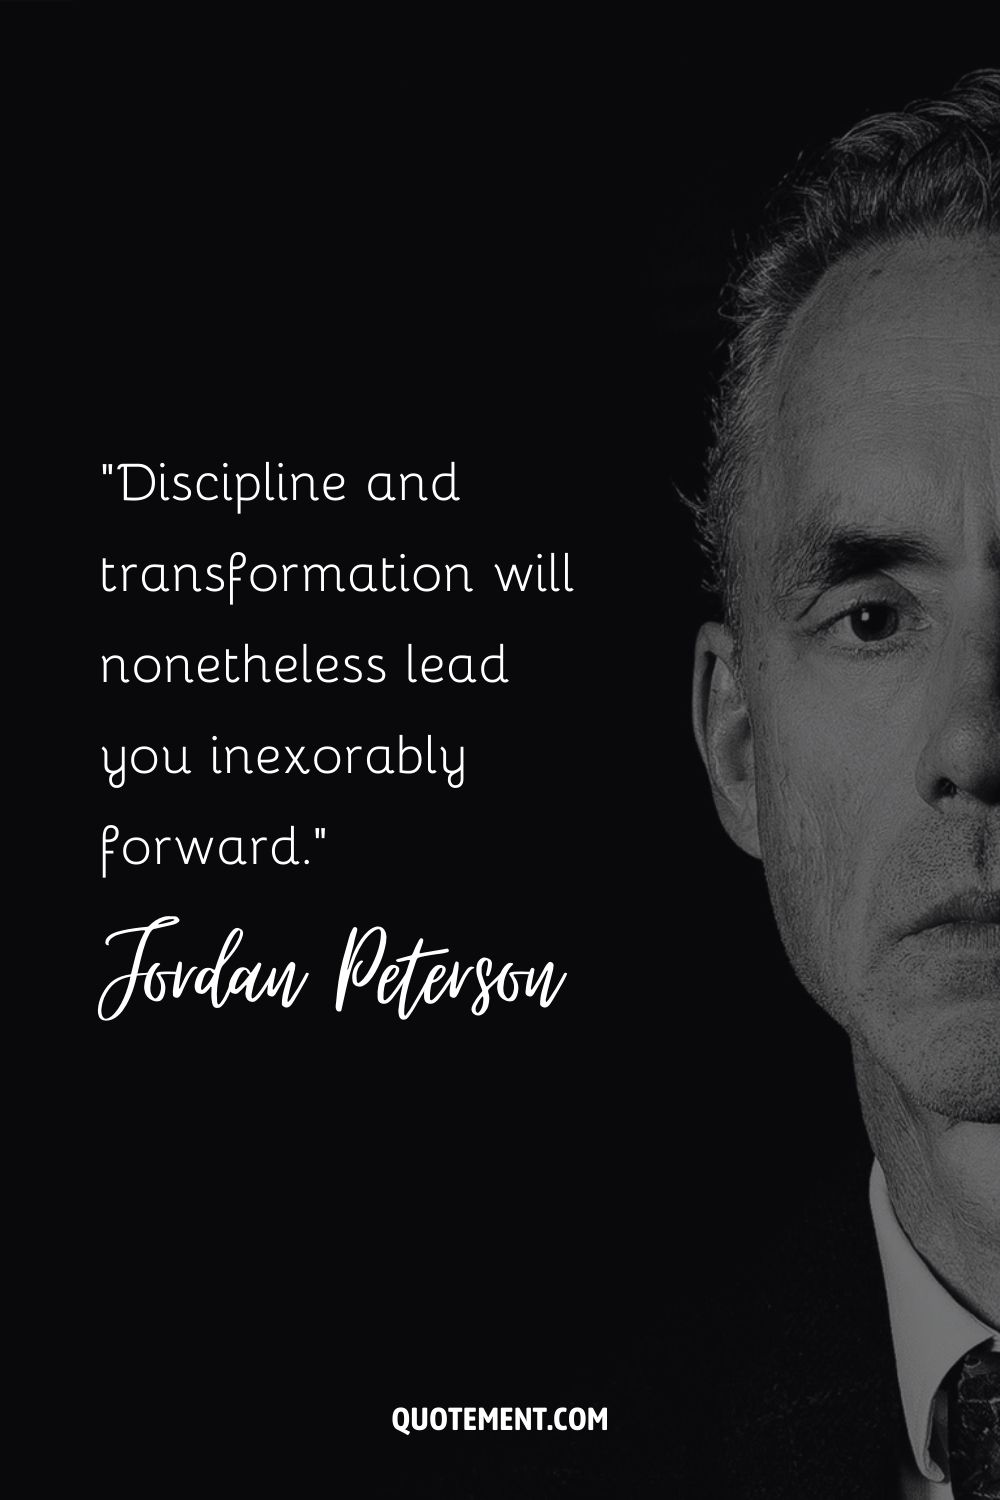 Discipline and transformation will nonetheless lead you inexorably forward